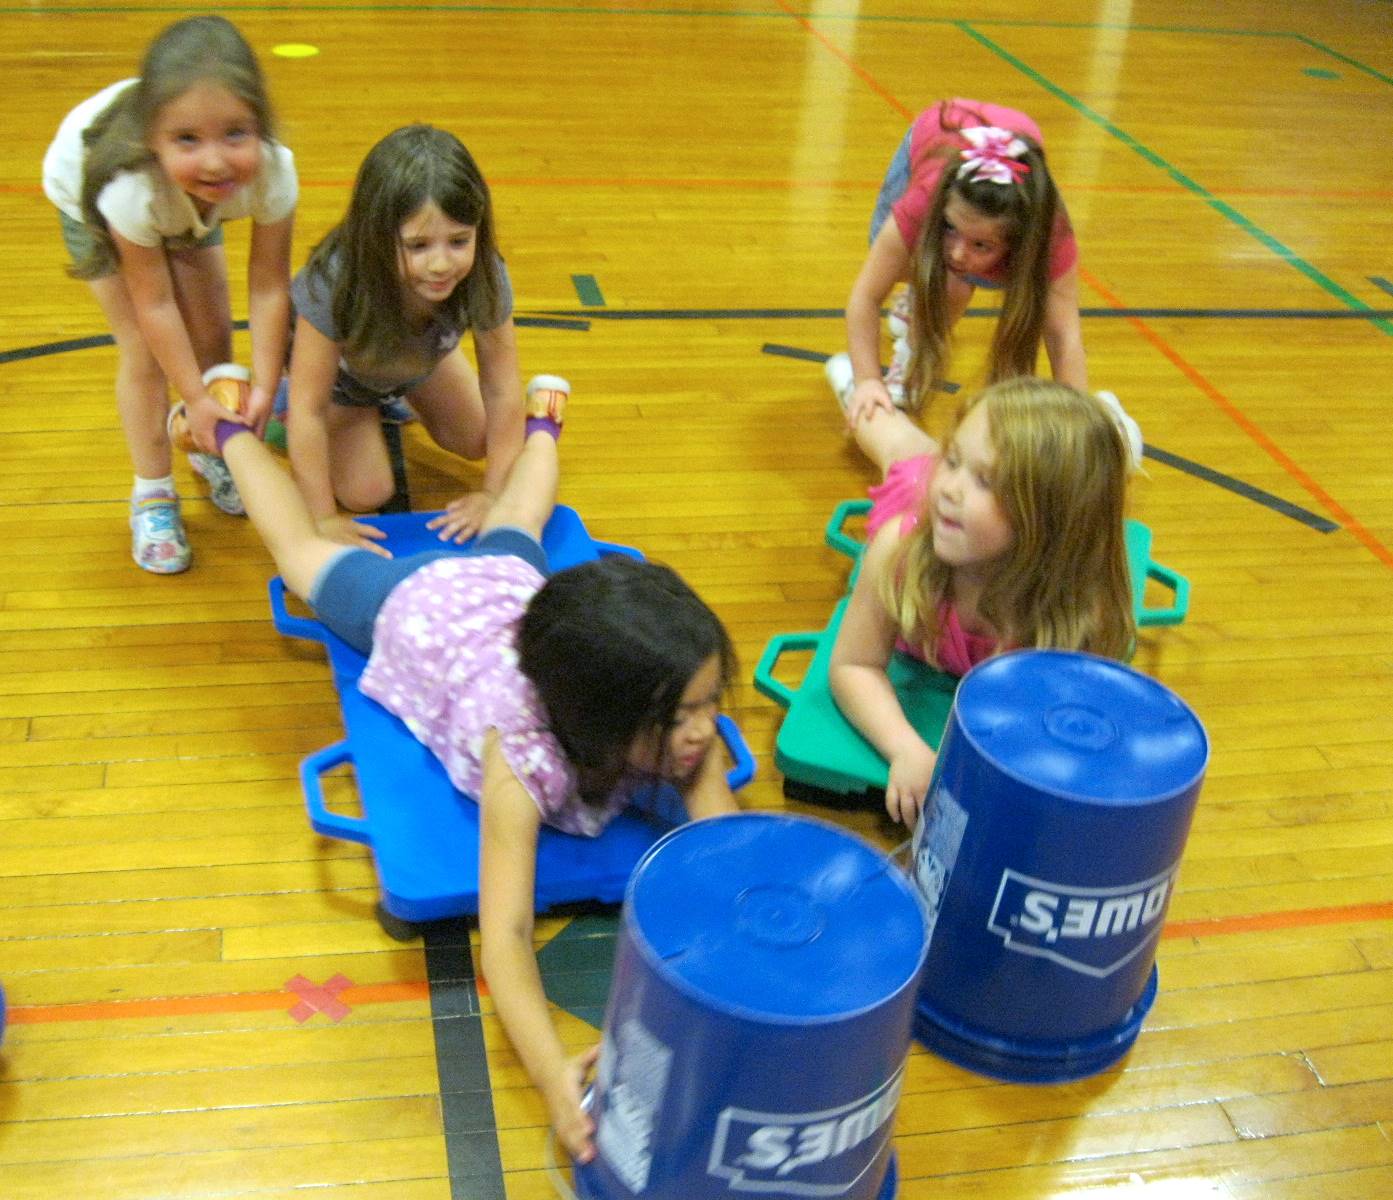 Kindergartners work together playing "Hungry Hippos" with buckets and scooters.